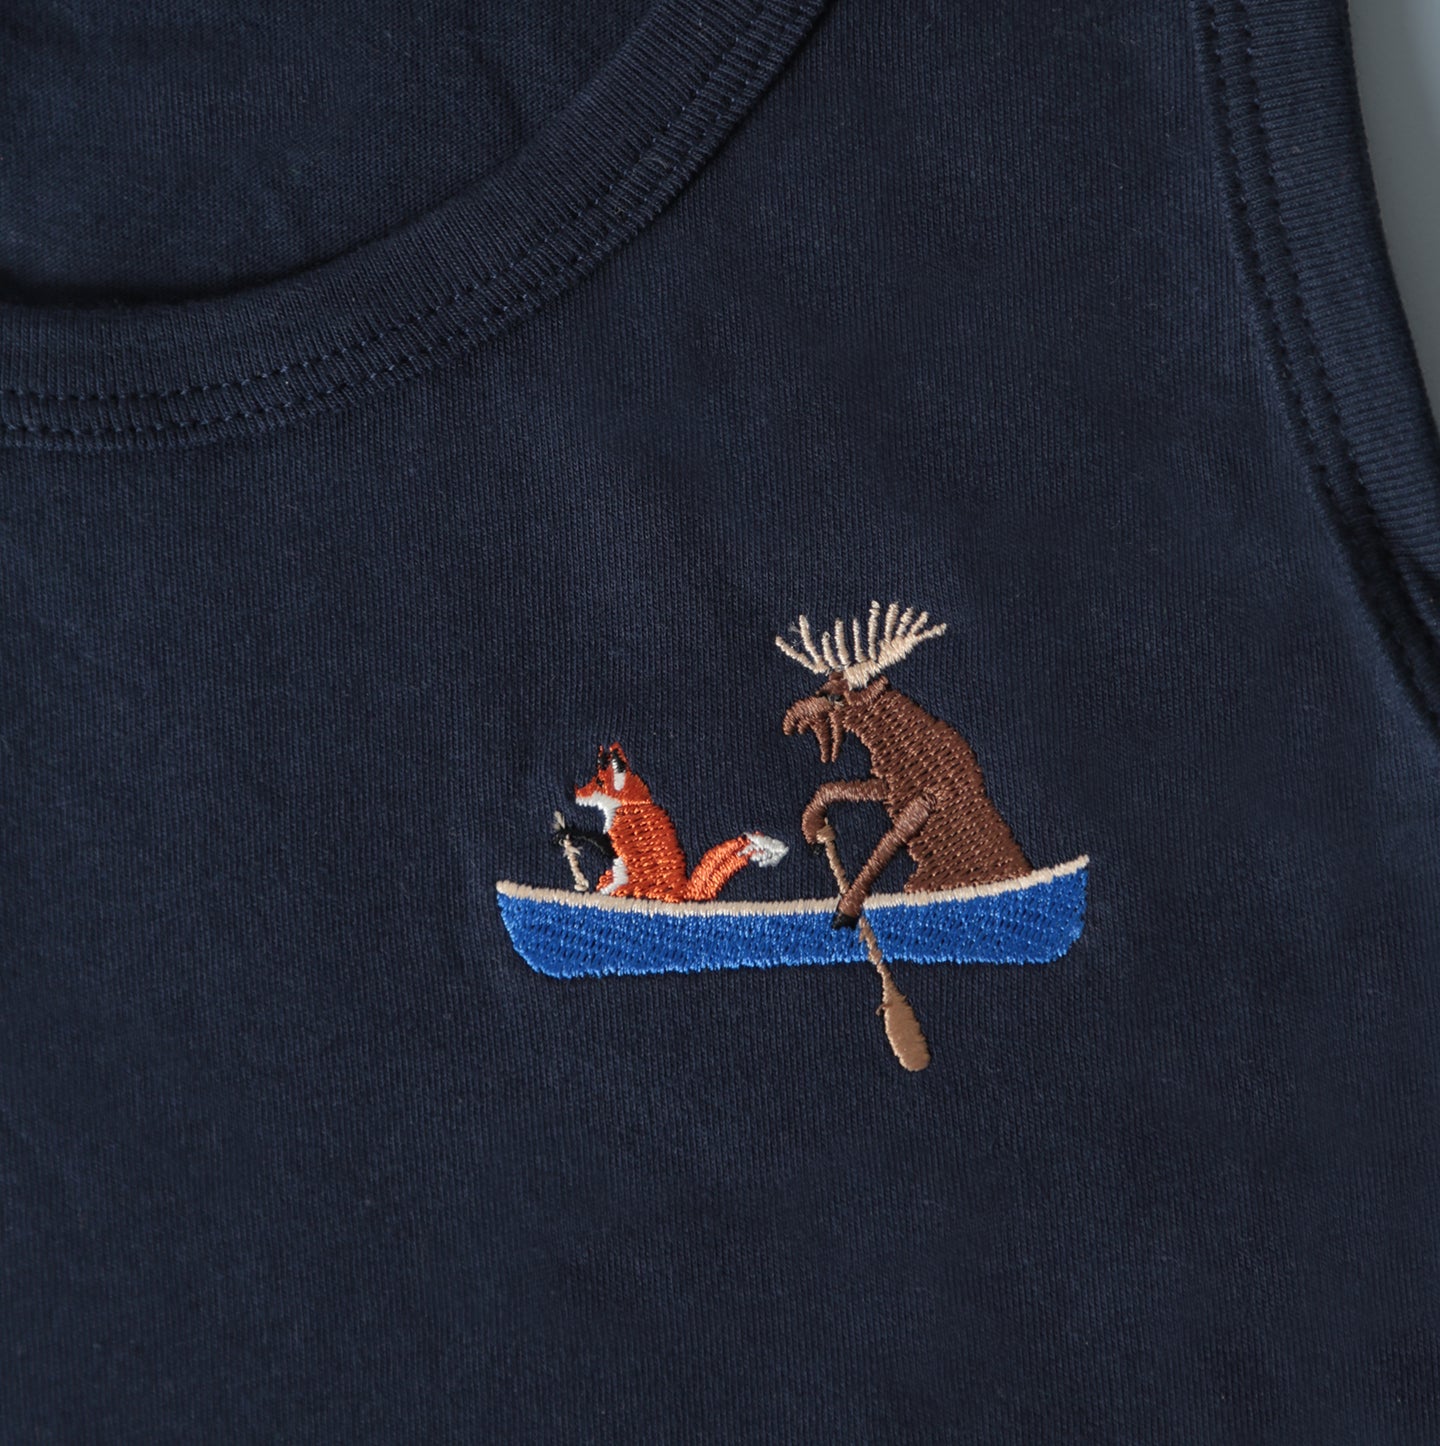 Tank Top - Navy - Paddle Pals Embroidery- CAMP Series